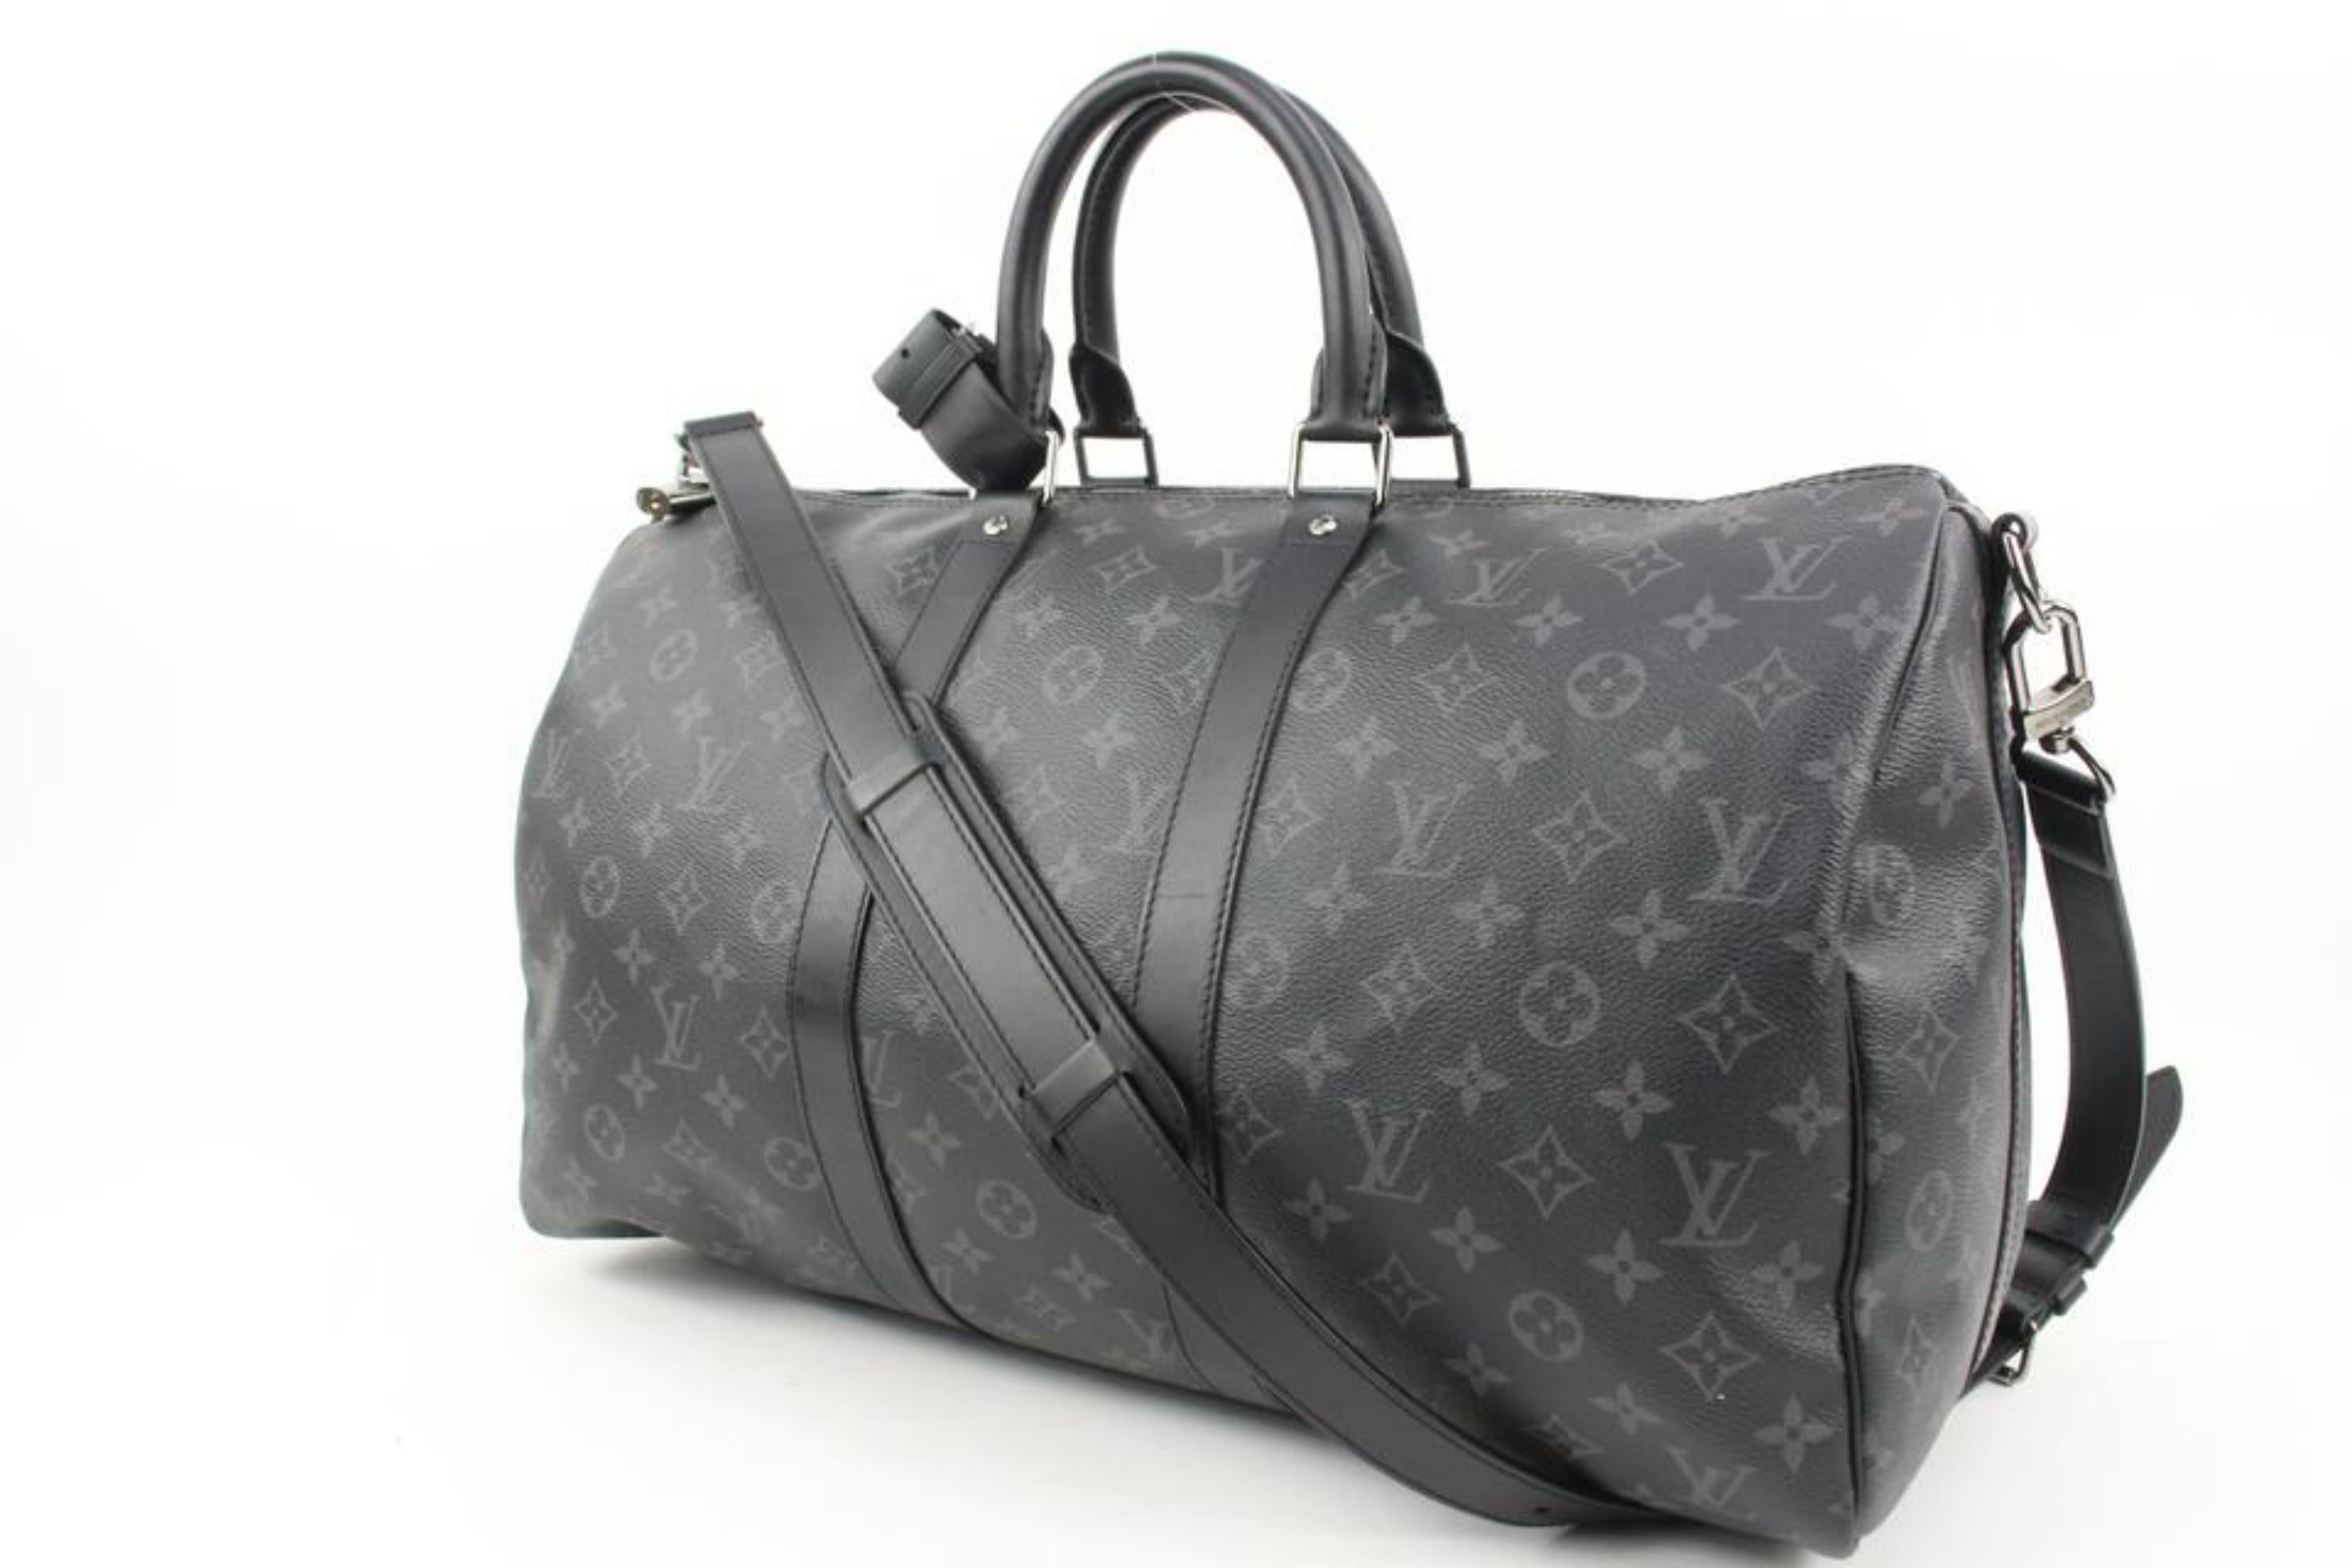 Louis Vuitton Black Monogram Eclipse Keepall Bandouliere 45 Duffle with Strap 7lv126s
Date Code/Serial Number: SD3107
Measurements: Length:  18